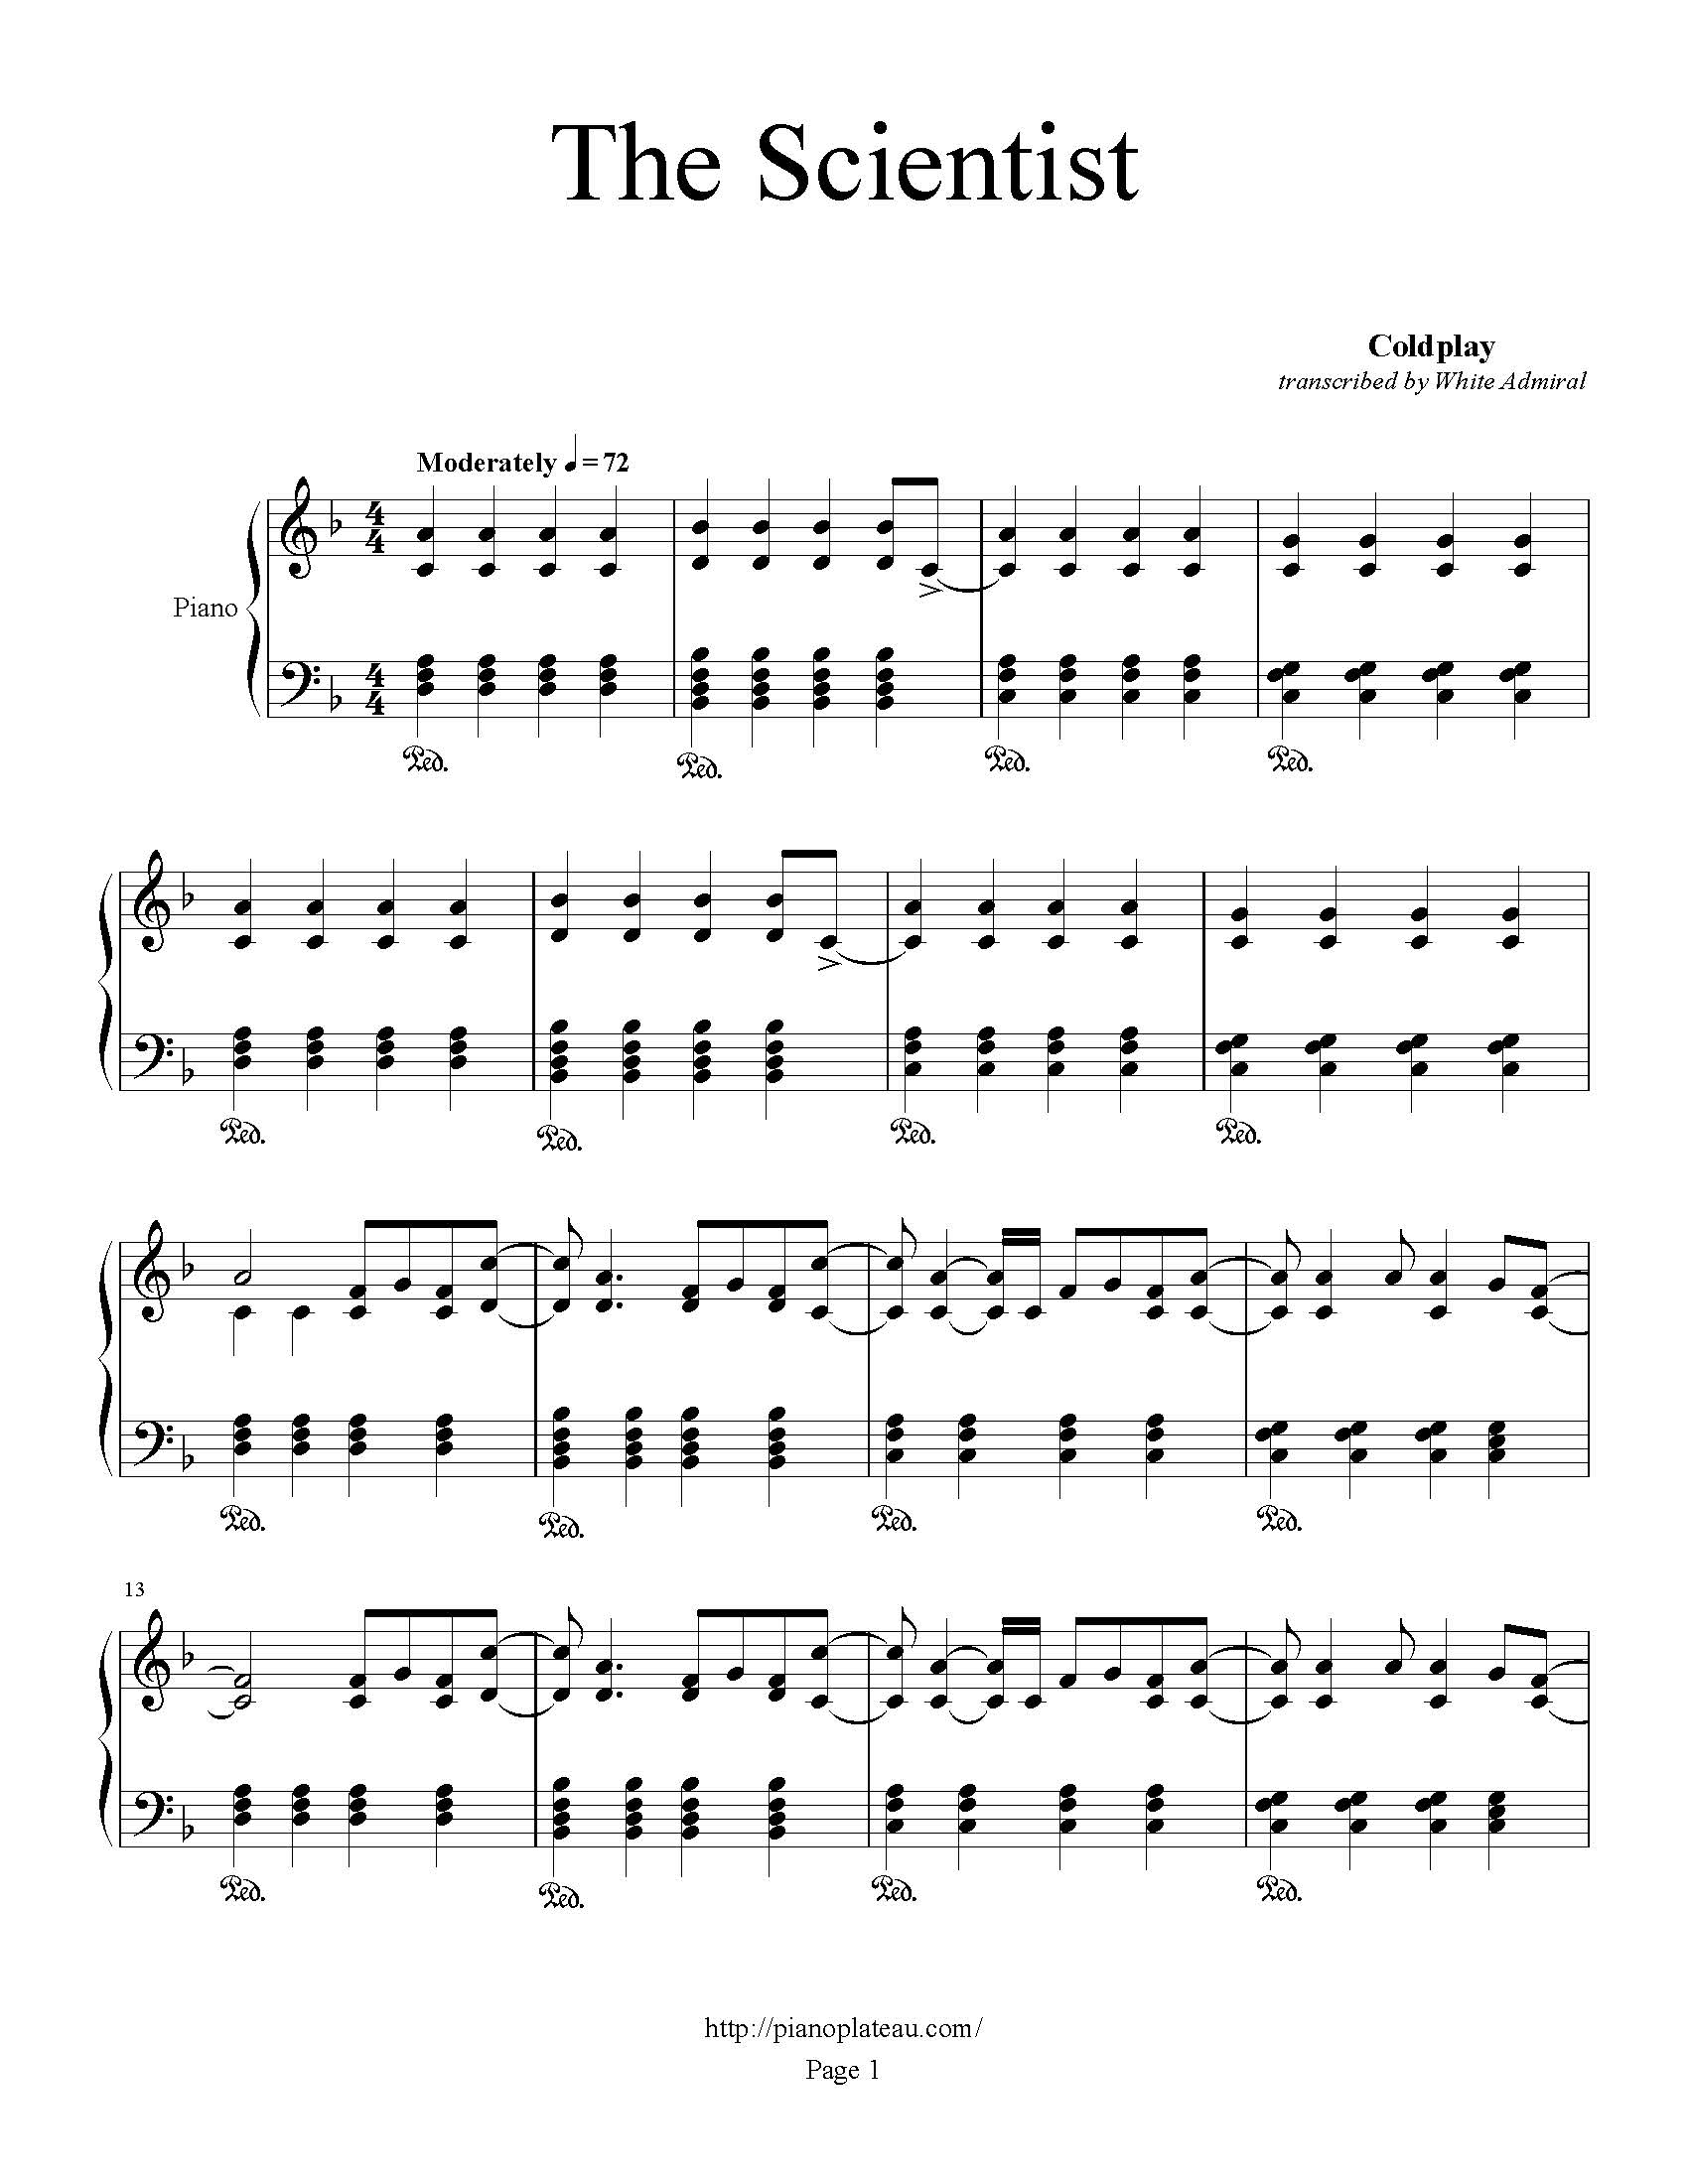 Coldplay The Scientist Piano Sheet Music Pdf - Epic Sheet Music